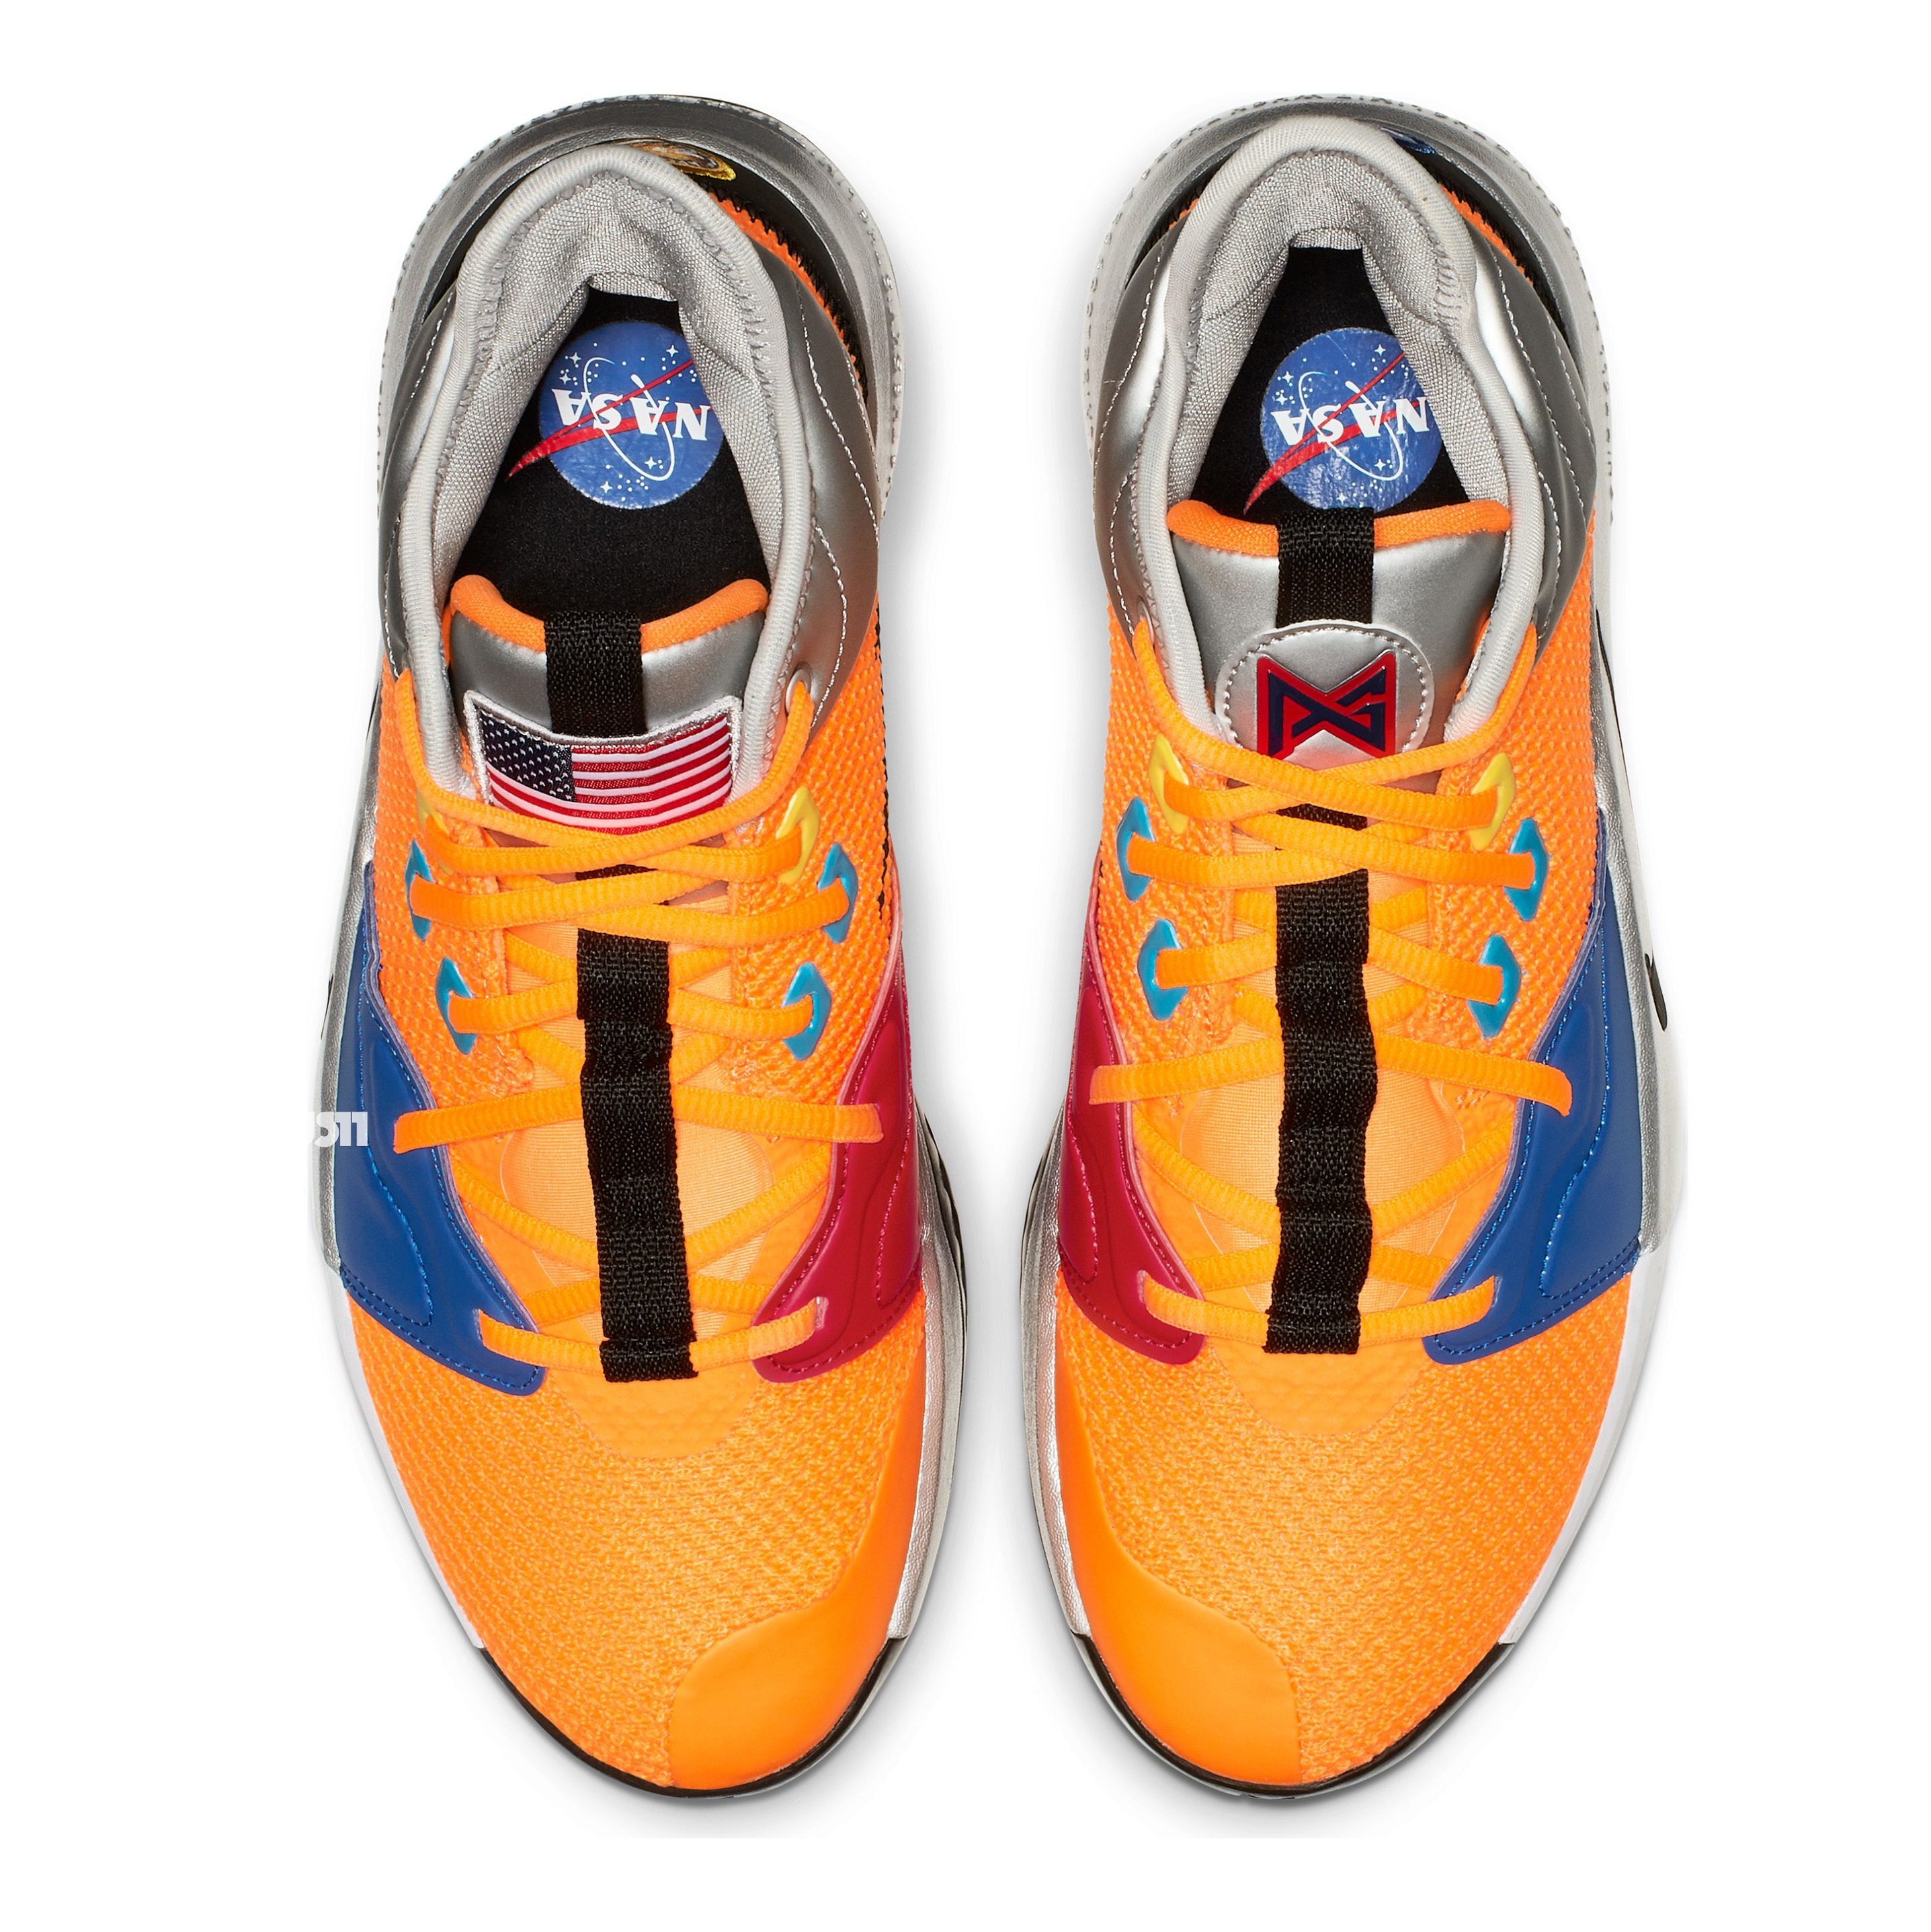 Our Best Look Yet at the Nike PG3 'NASA' - WearTesters